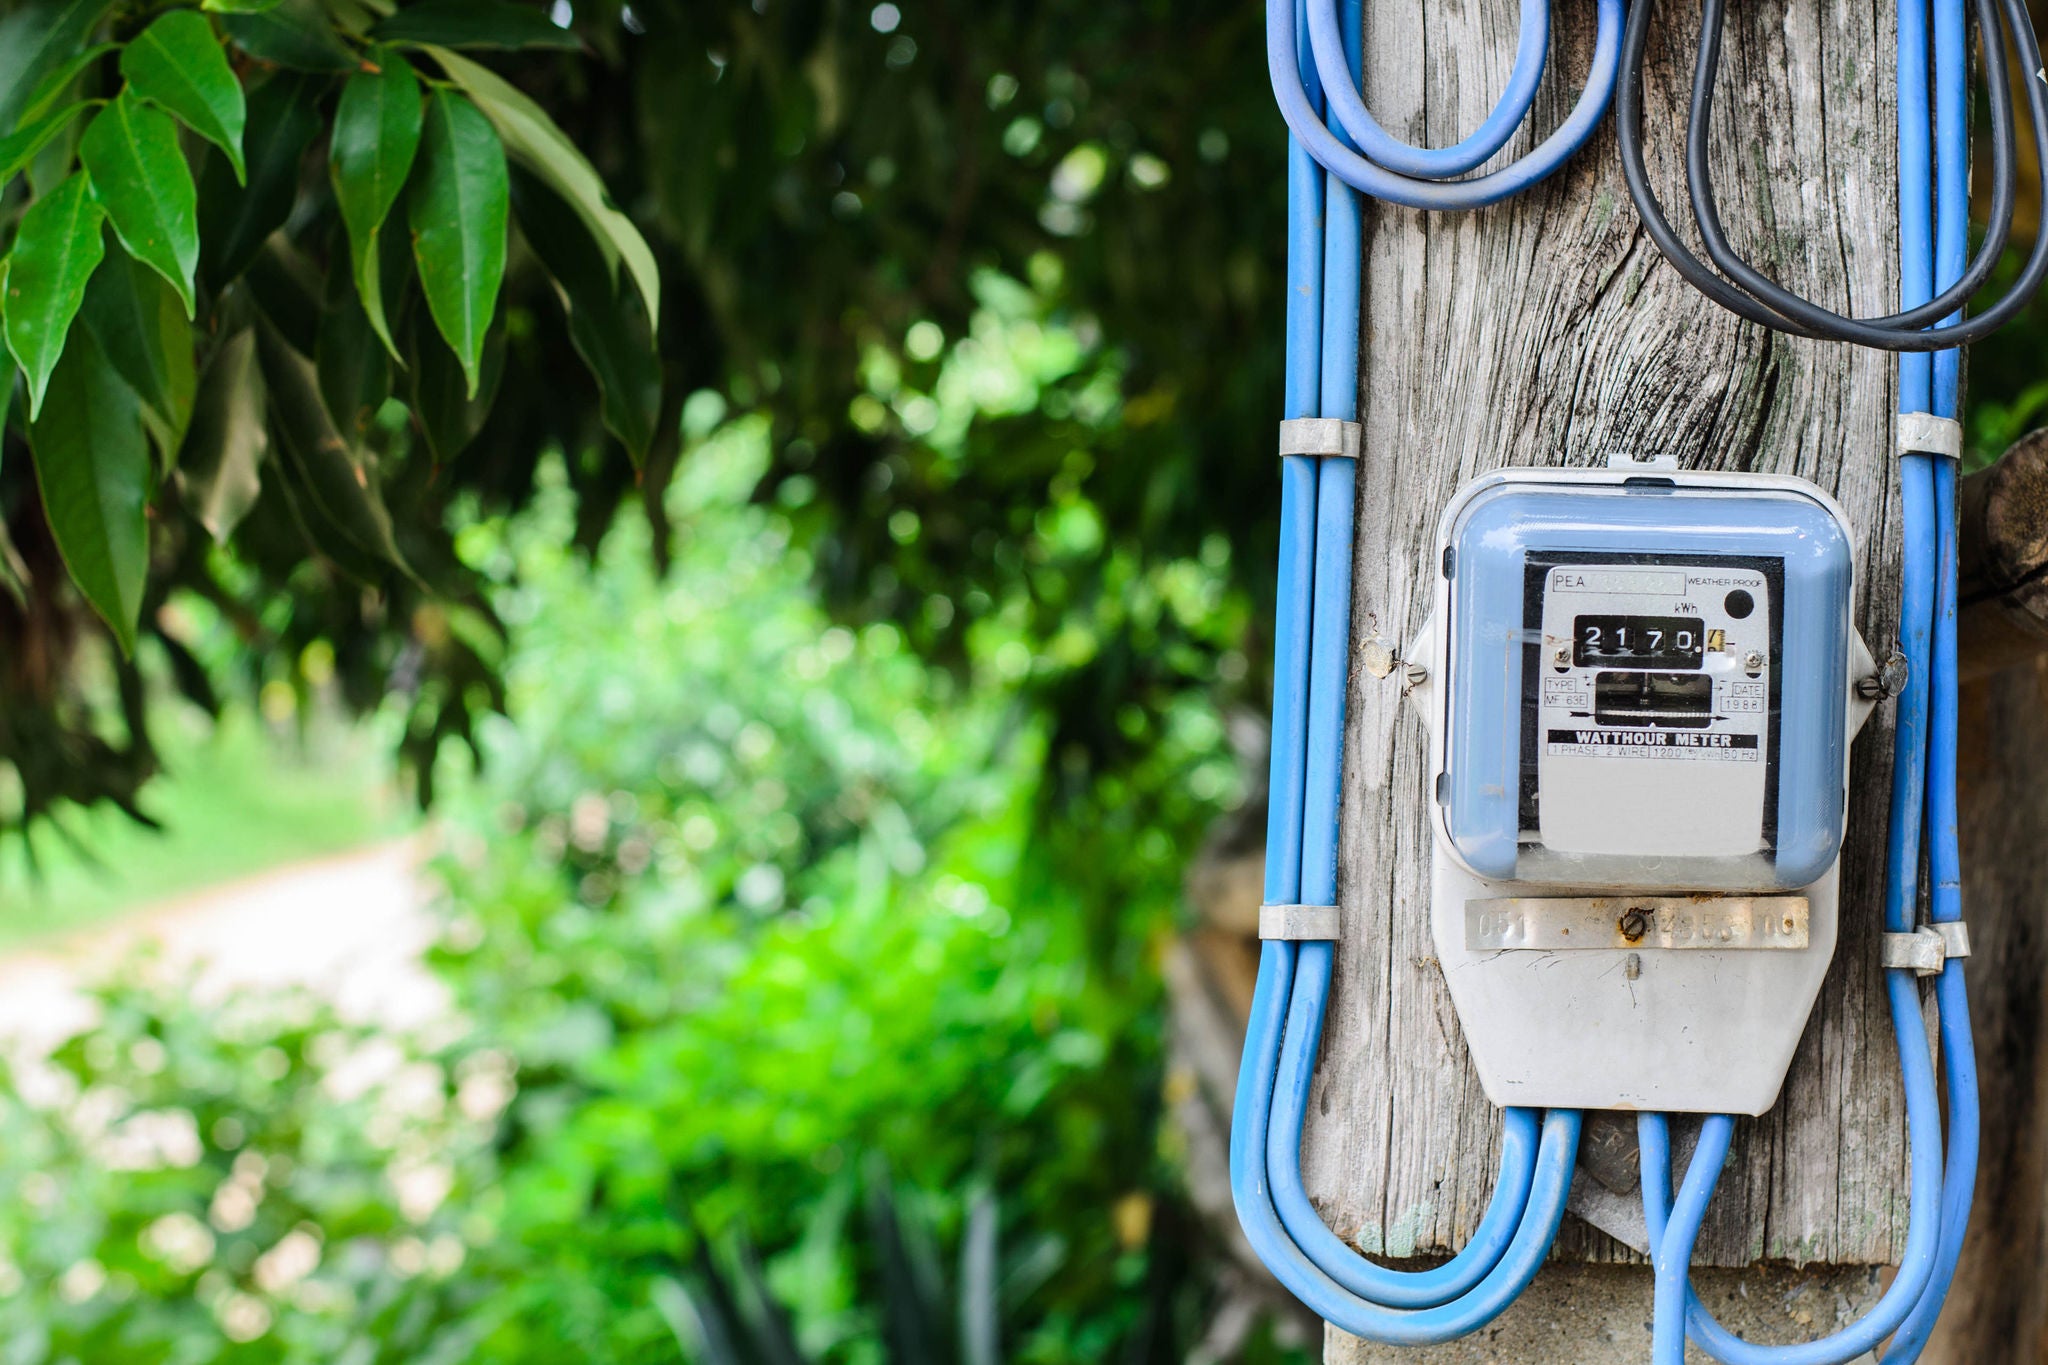 An electricity meter with blue cables mounted to a wooden pole